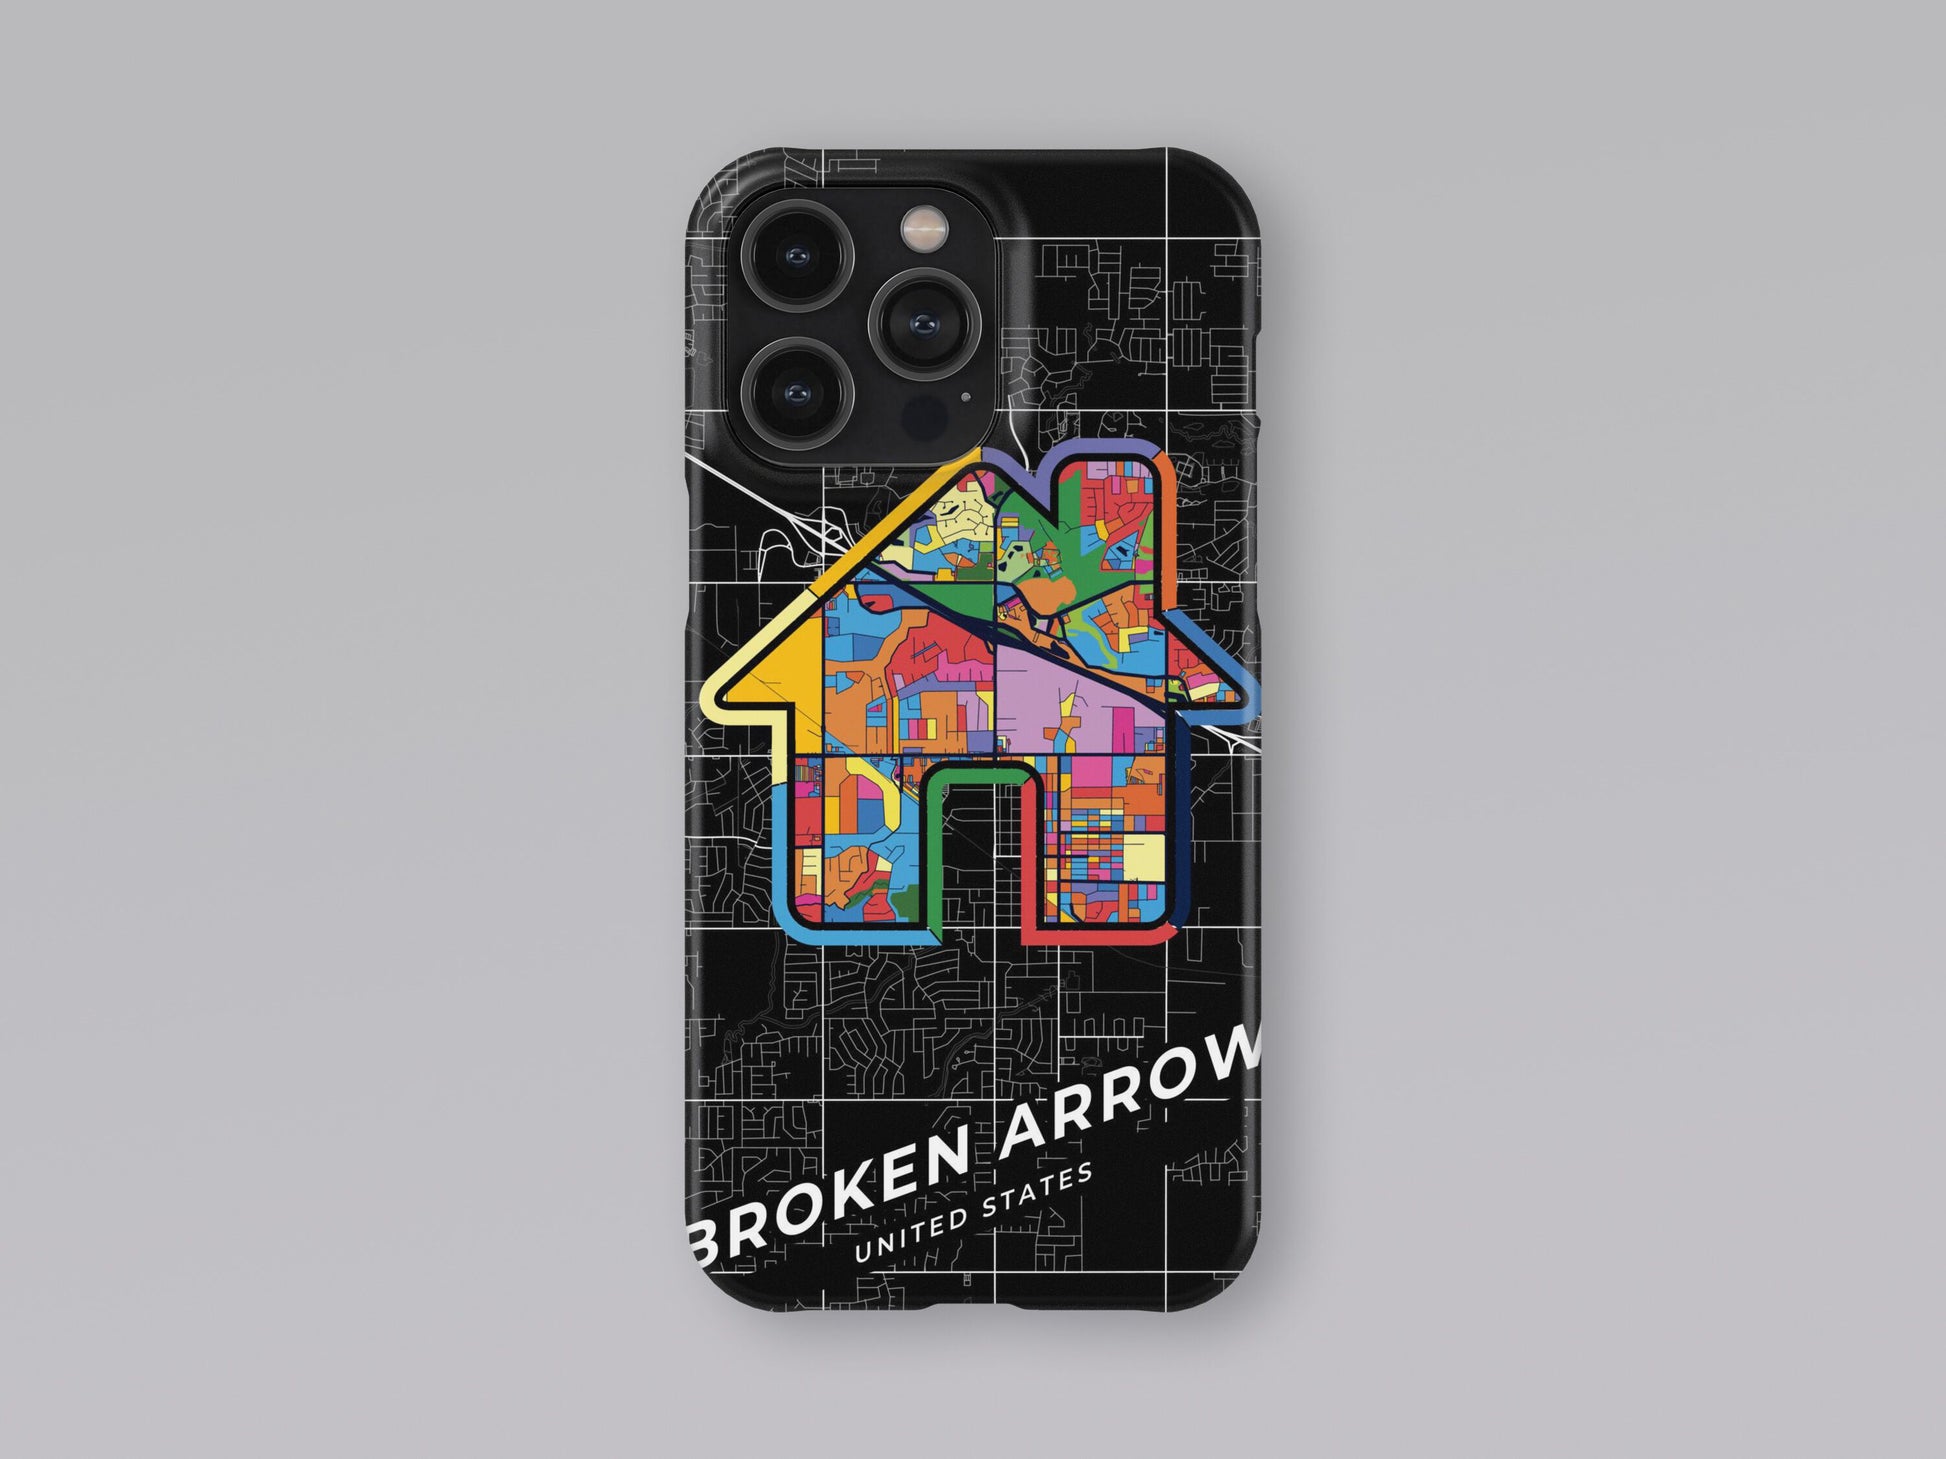 Broken Arrow Oklahoma slim phone case with colorful icon. Birthday, wedding or housewarming gift. Couple match cases. 3